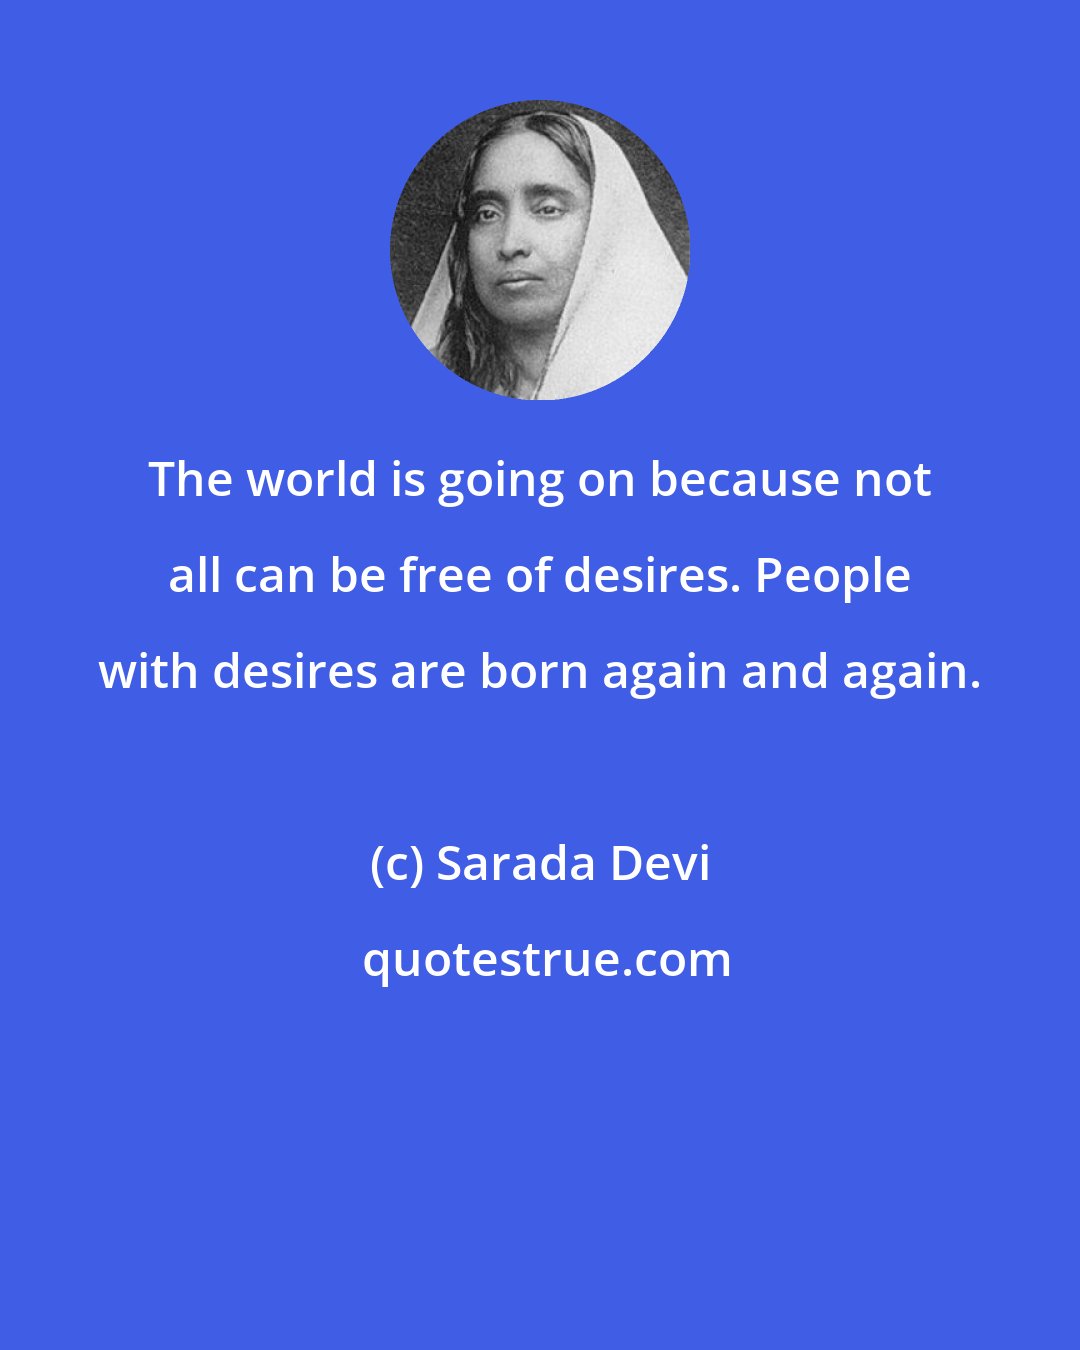 Sarada Devi: The world is going on because not all can be free of desires. People with desires are born again and again.